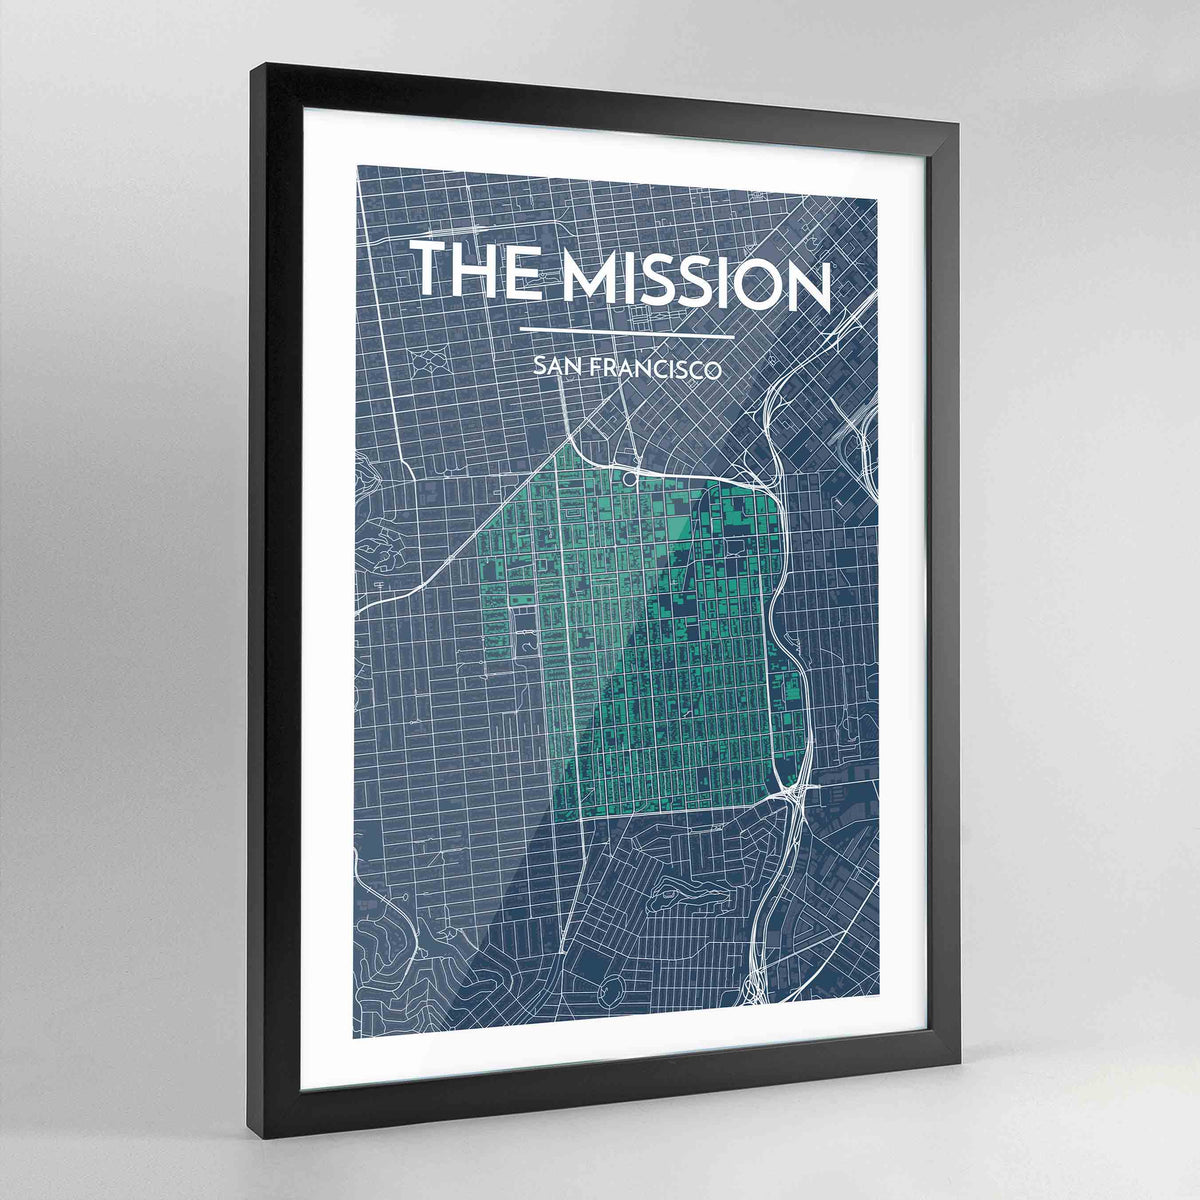 Framed The Mission San Francisco City Map Art Print - Point Two Design